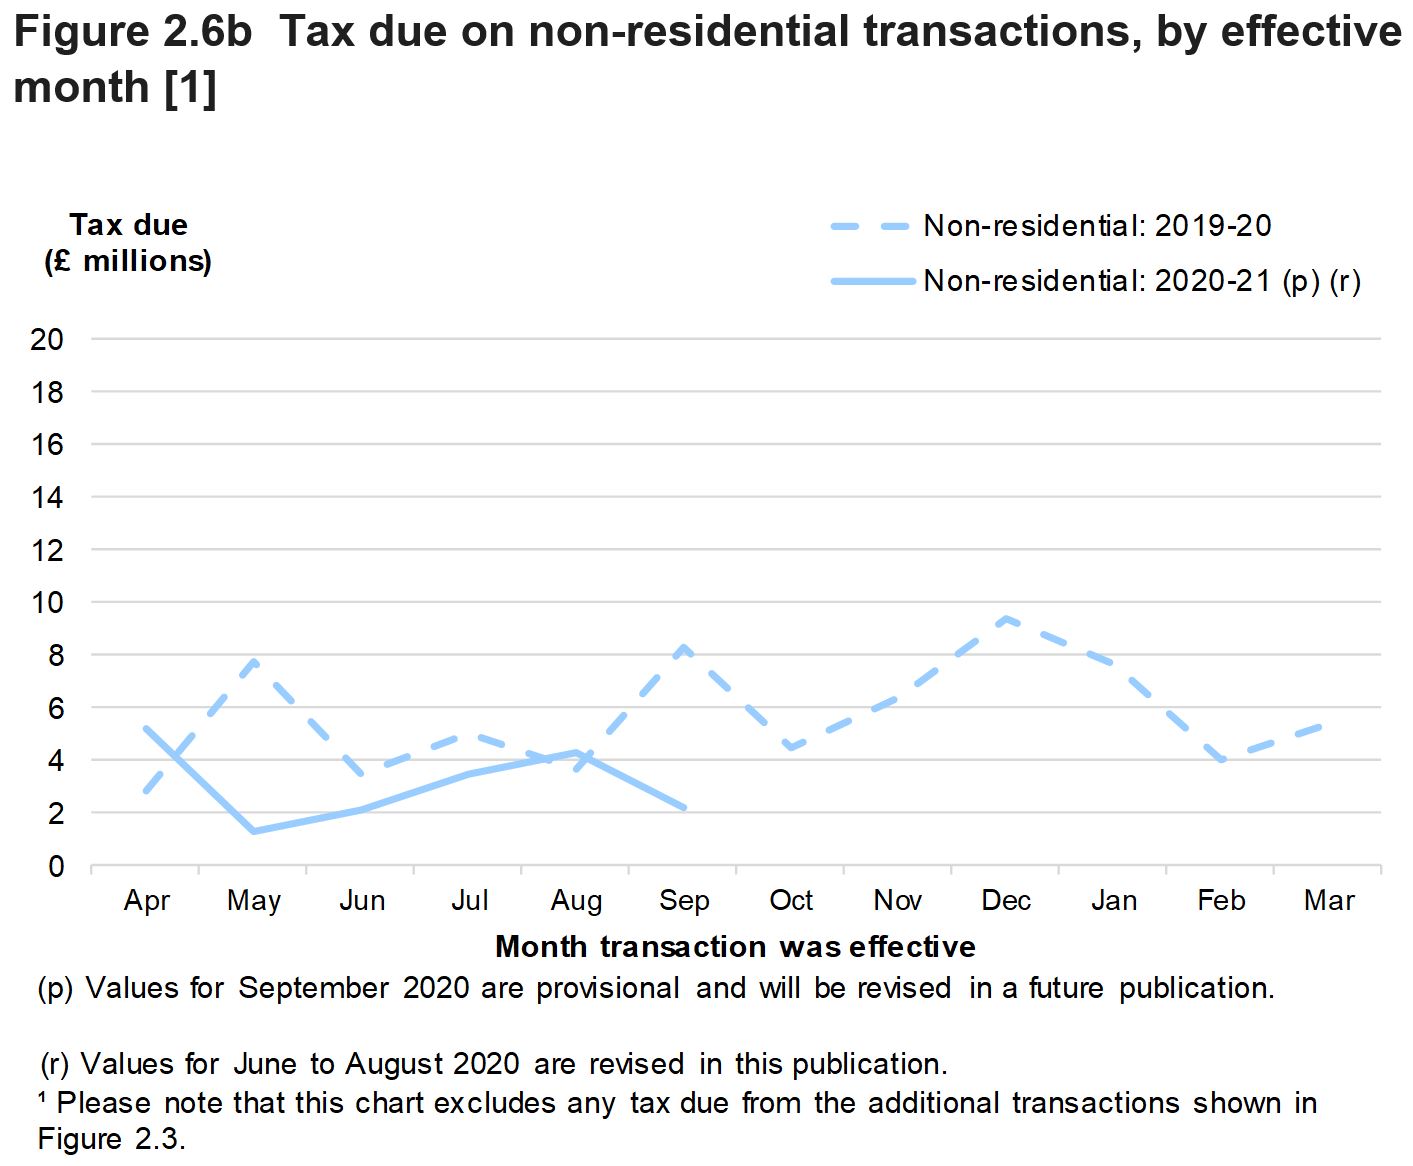 Figure 2.6b shows the monthly amount of tax due on reported notifiable transactions from April 2019 to September 2020, for non-residential transactions.